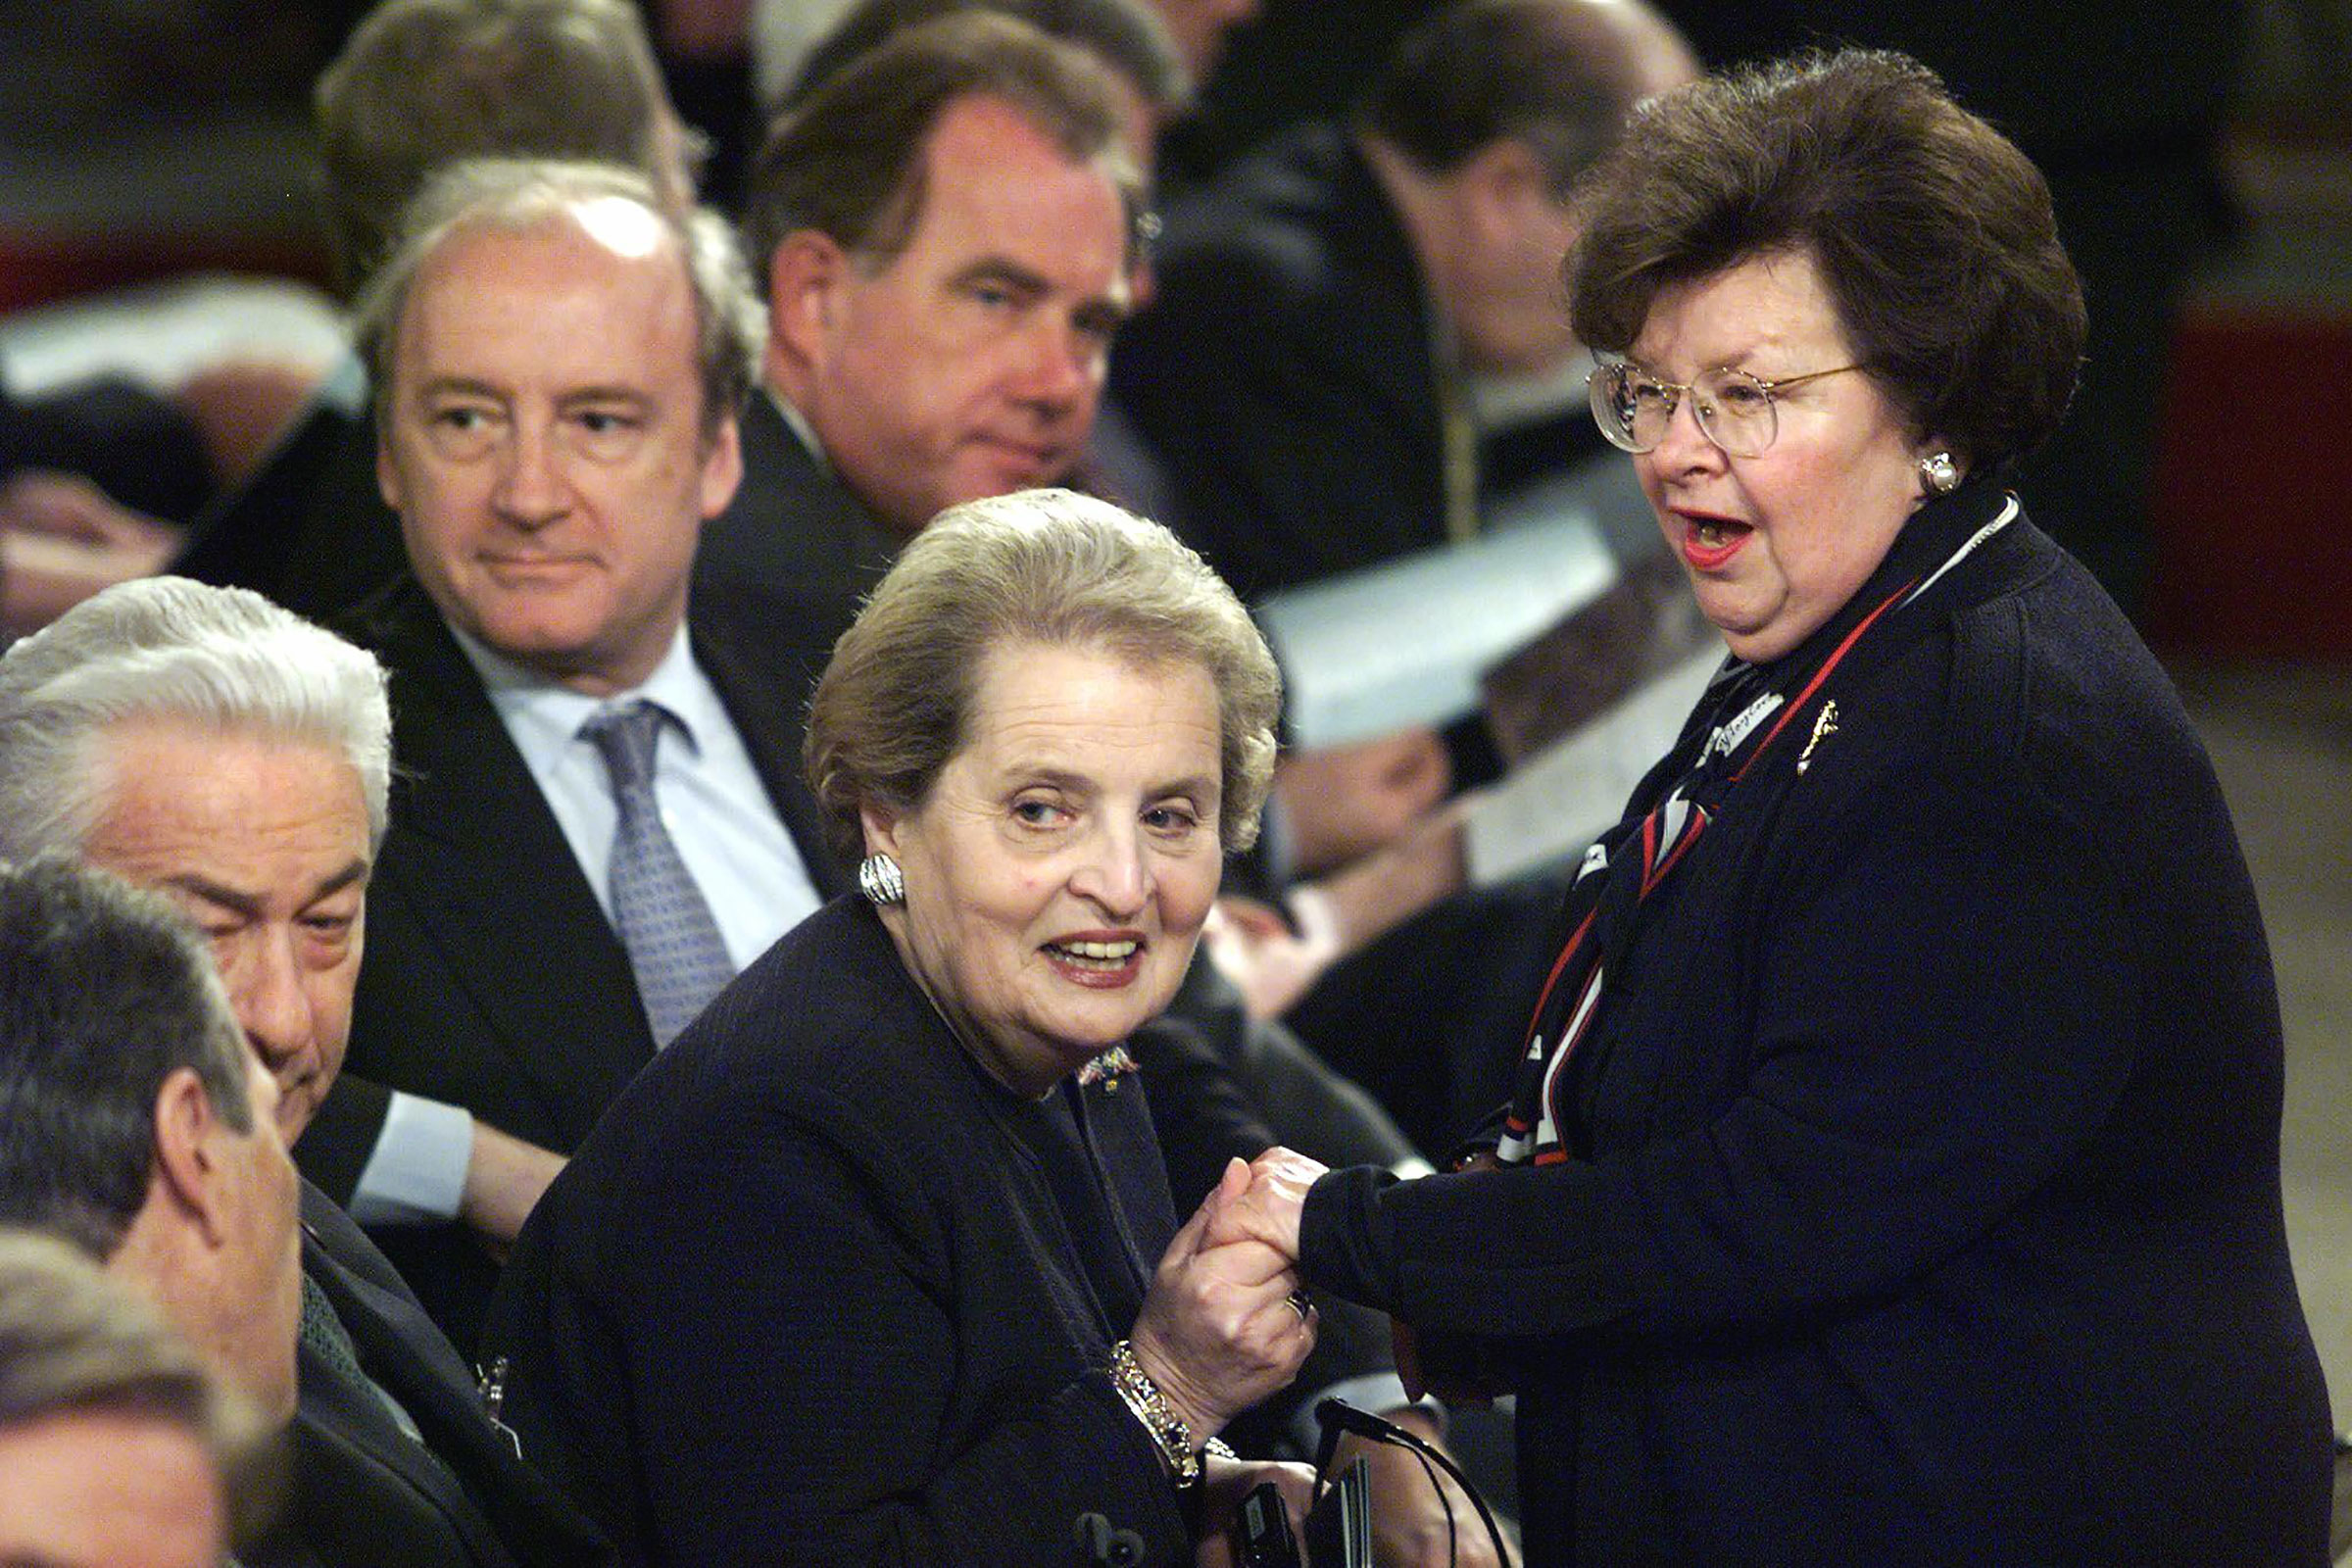 Madeleine Albright and Representative Barbara Mikulski greet each other at the commemorative ceremony of the NATO Summit in Washington on April 23, 1999. (Stephen Jaffe—AFP/Getty Images)